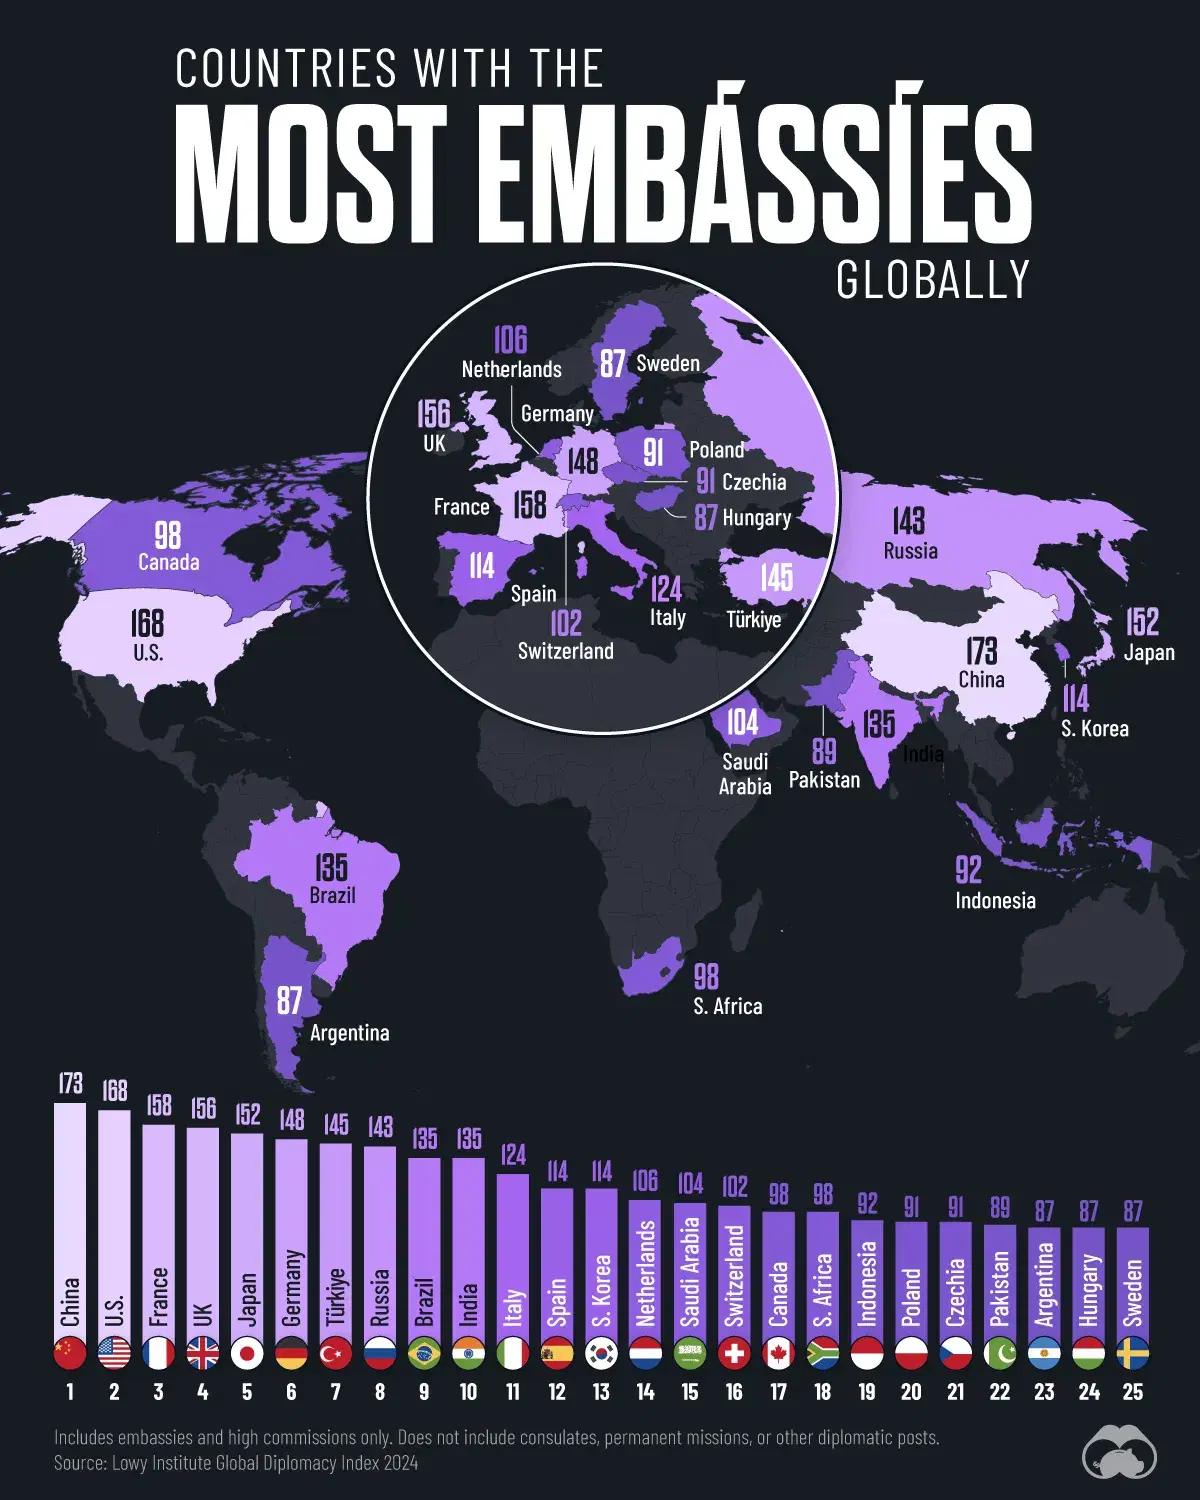 China Has More Embassies Than Any Other Country